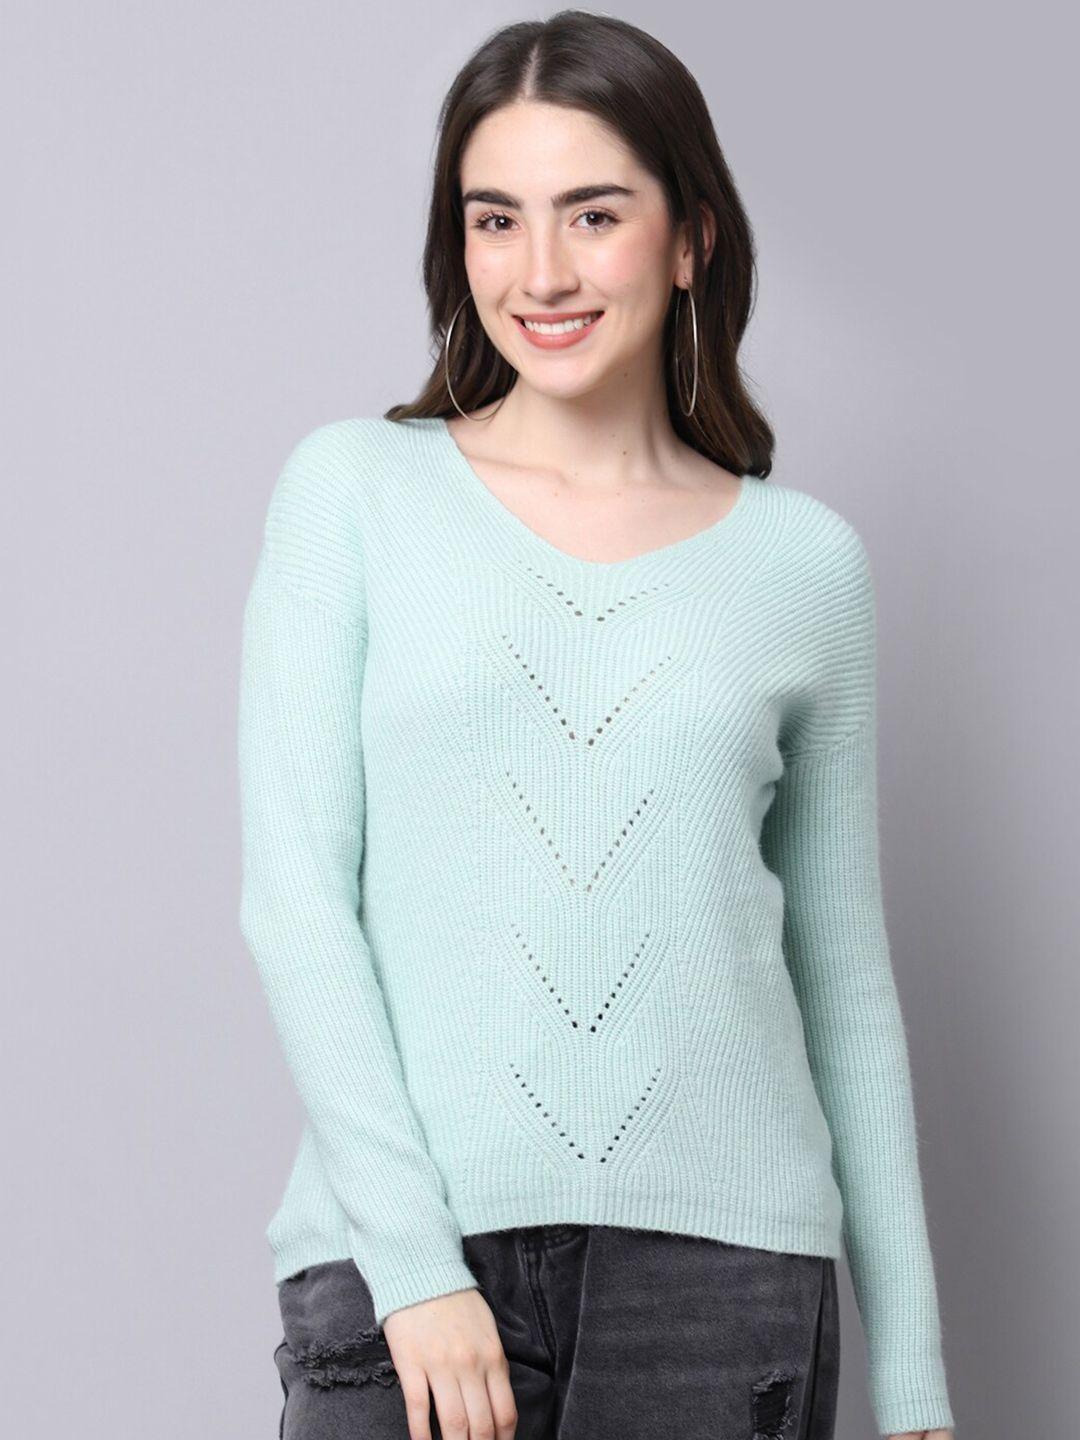 tag-7-open-knit-v-neck-long-sleeves-knitted-pullover-sweater